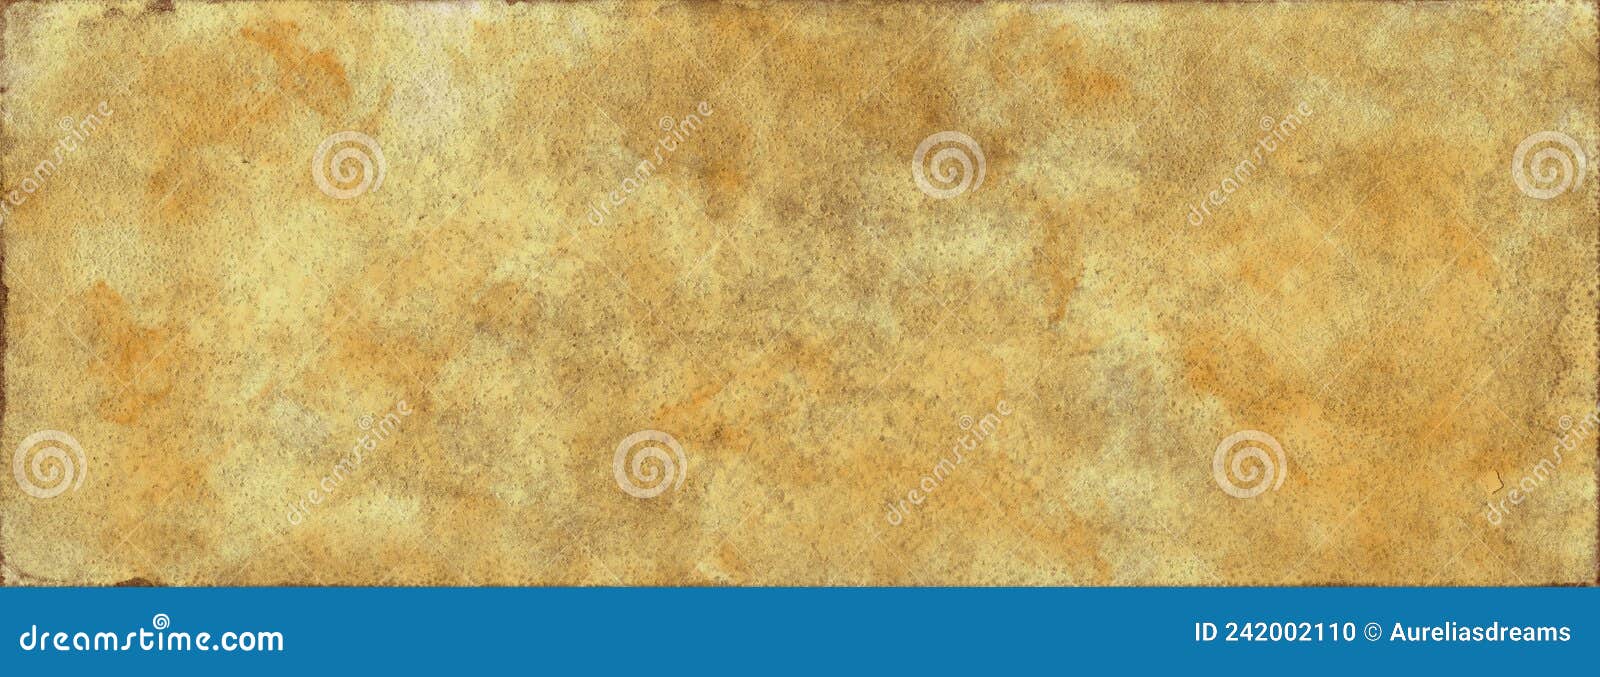 Brown parchment paper background with rough distressed vintage